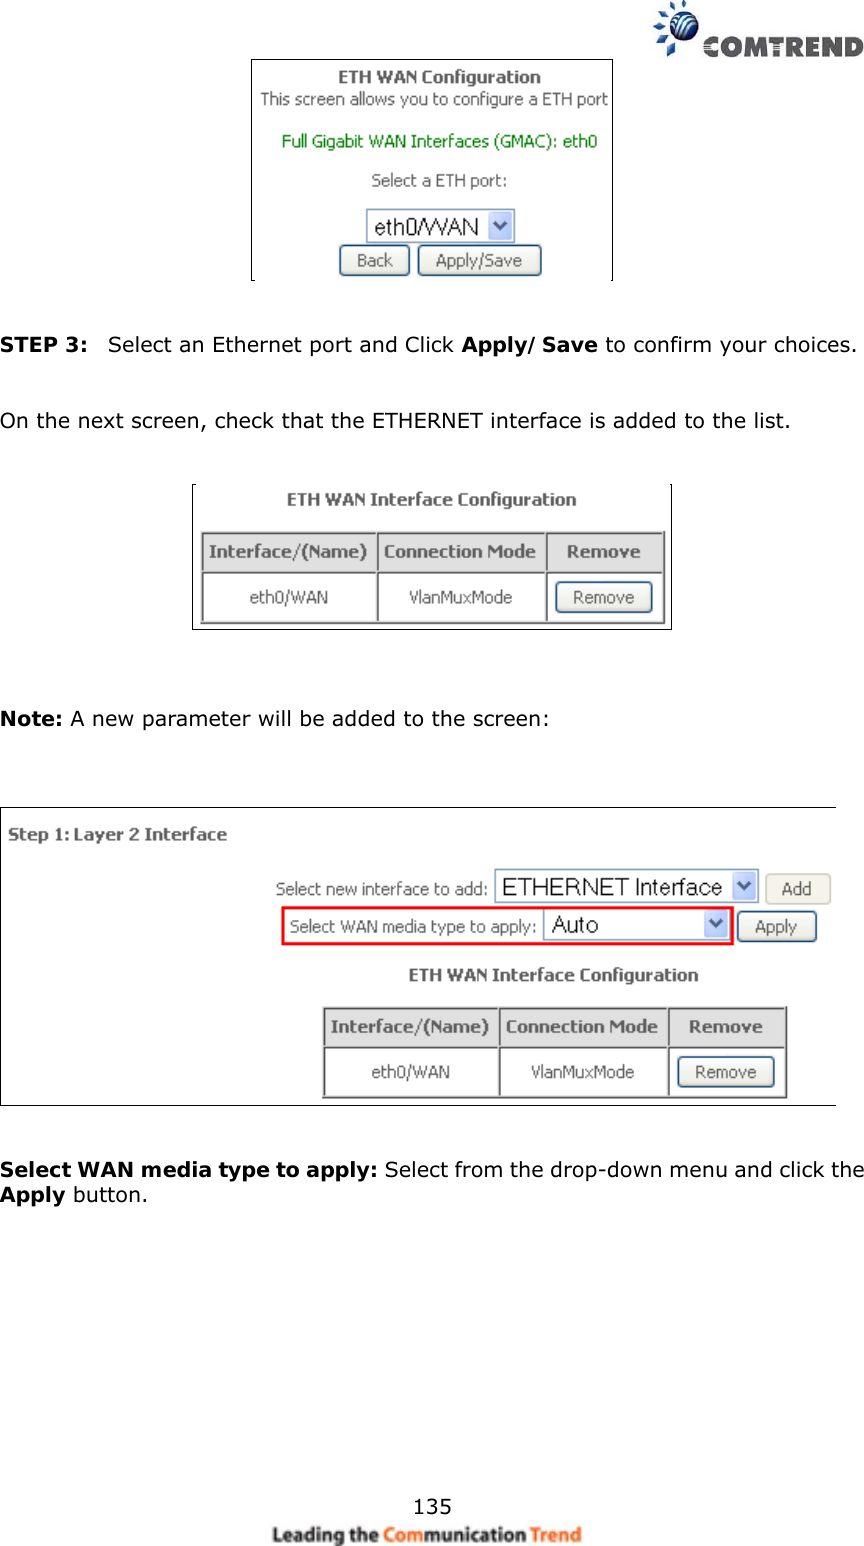    135   STEP 3:  Select an Ethernet port and Click Apply/Save to confirm your choices.    On the next screen, check that the ETHERNET interface is added to the list.         Note: A new parameter will be added to the screen:       Select WAN media type to apply: Select from the drop-down menu and click the Apply button.      